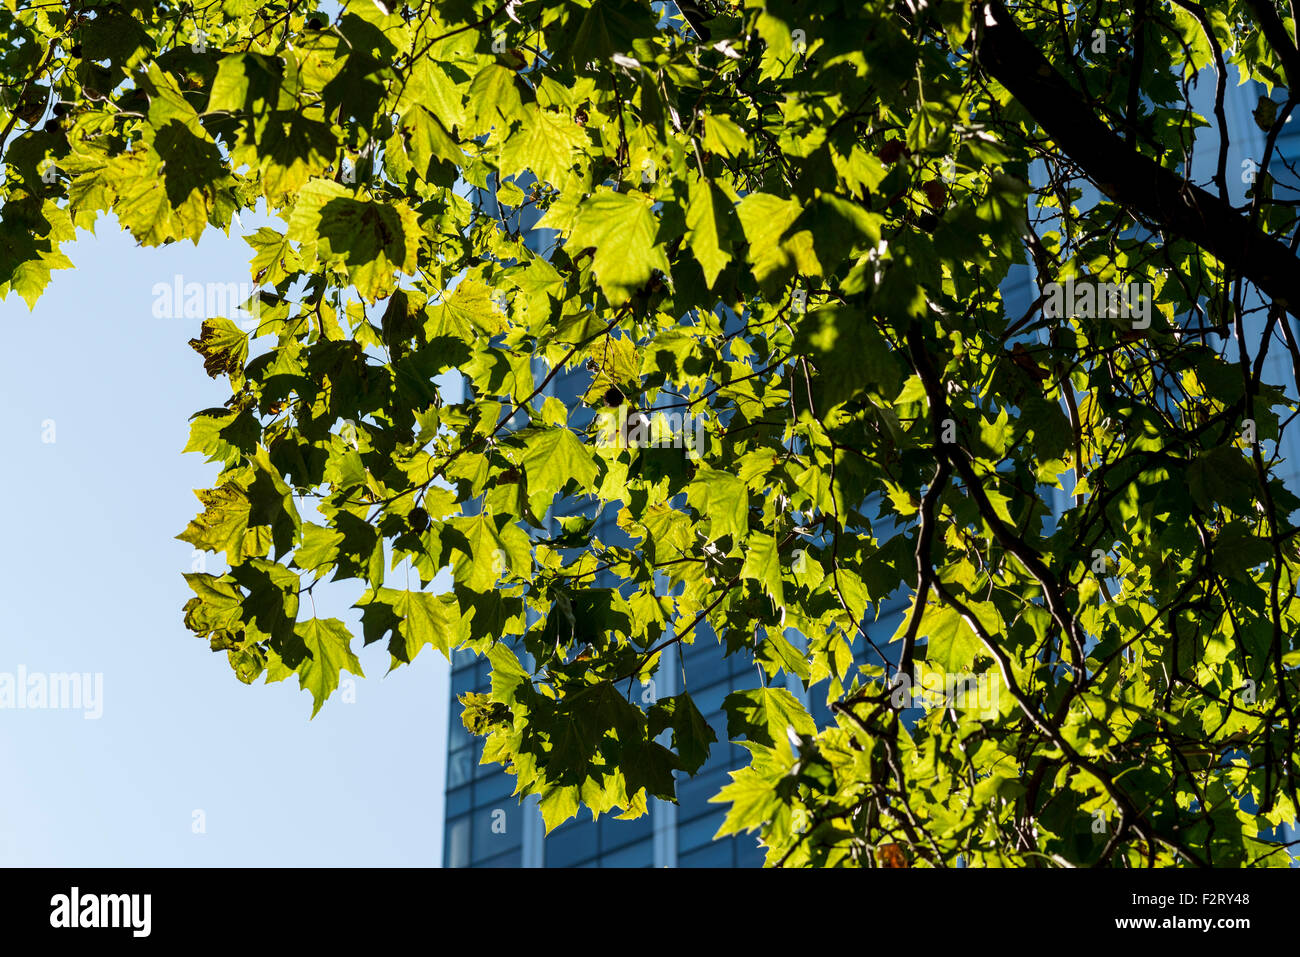 The back-lit leaves of a London Plane tree taken in central London with an office block in the background Stock Photo